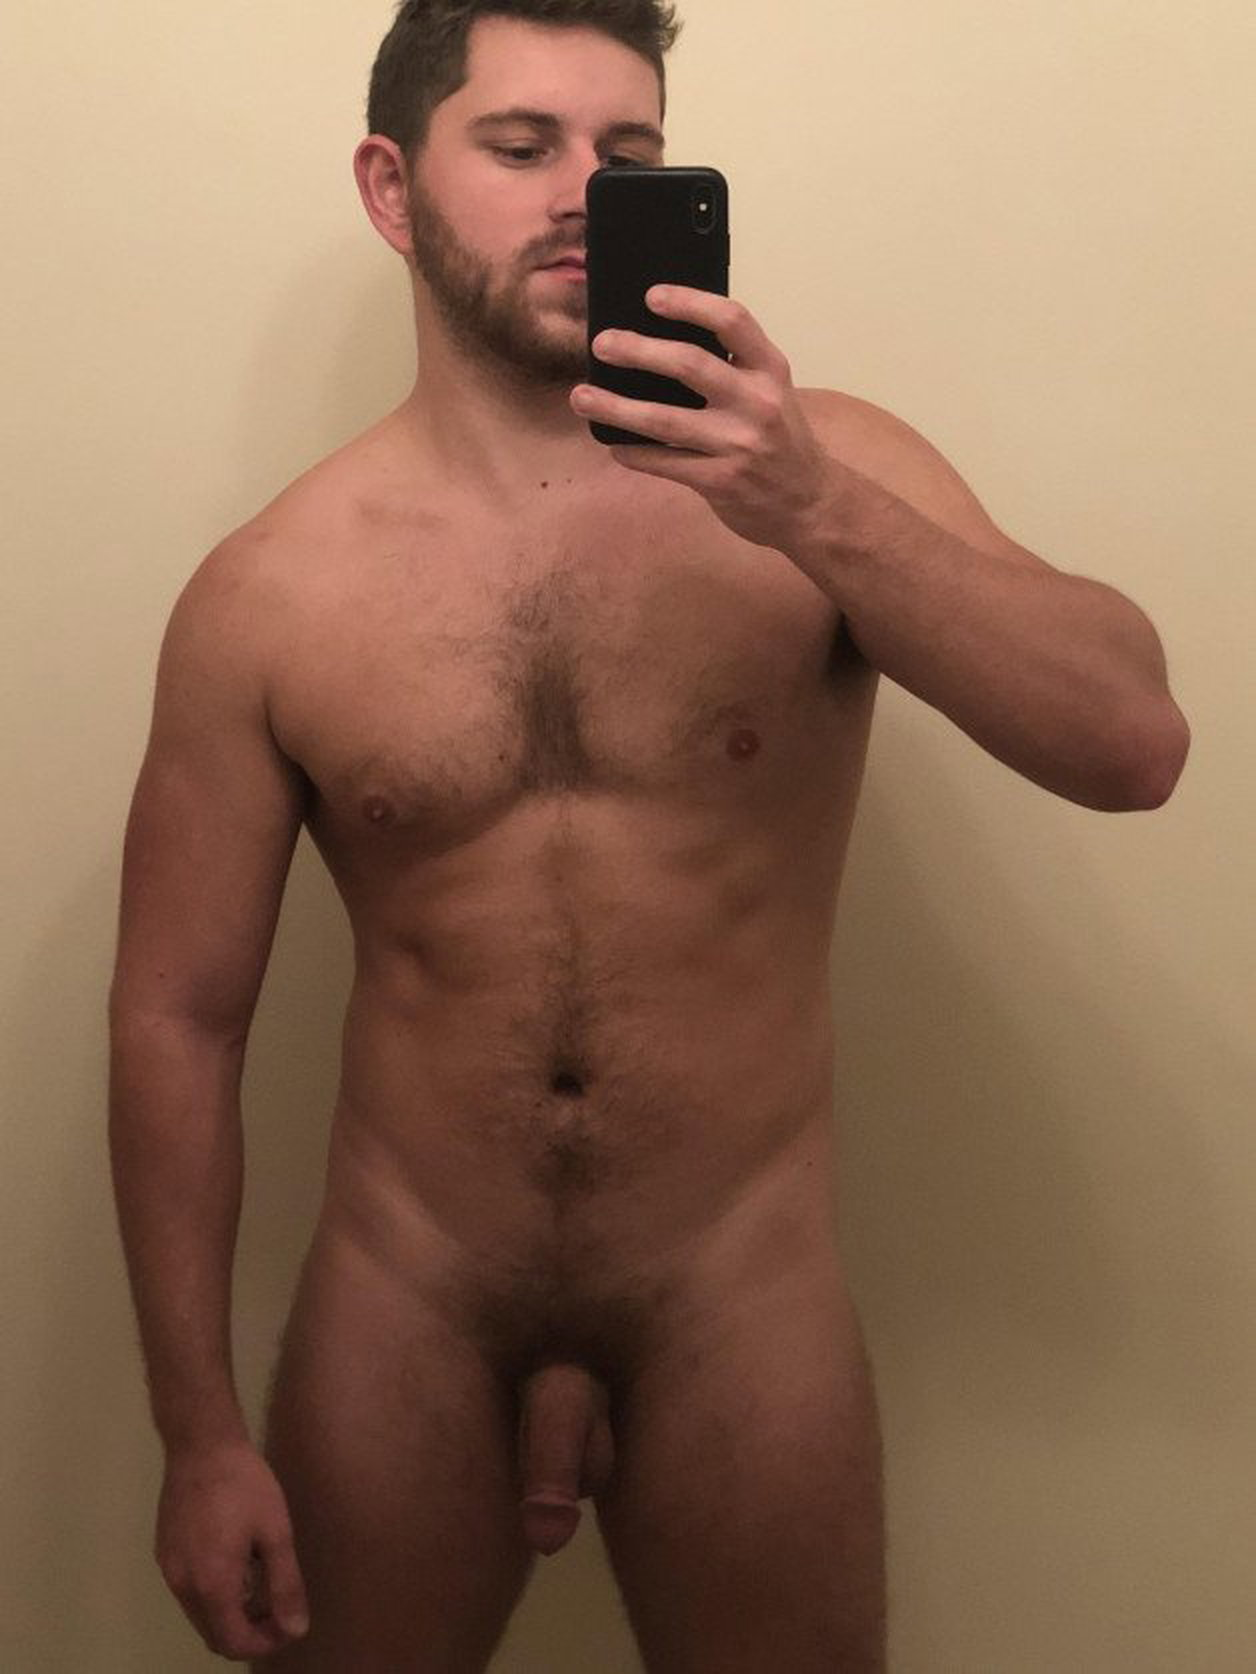 Watch the Photo by Ultra-Masculine-XXX with the username @Ultra-Masculine-XXX, posted on September 14, 2021. The post is about the topic Gay Amateur. and the text says 'GrizzlyG0406 #GrizzlyG0406 #hairy #hunk'